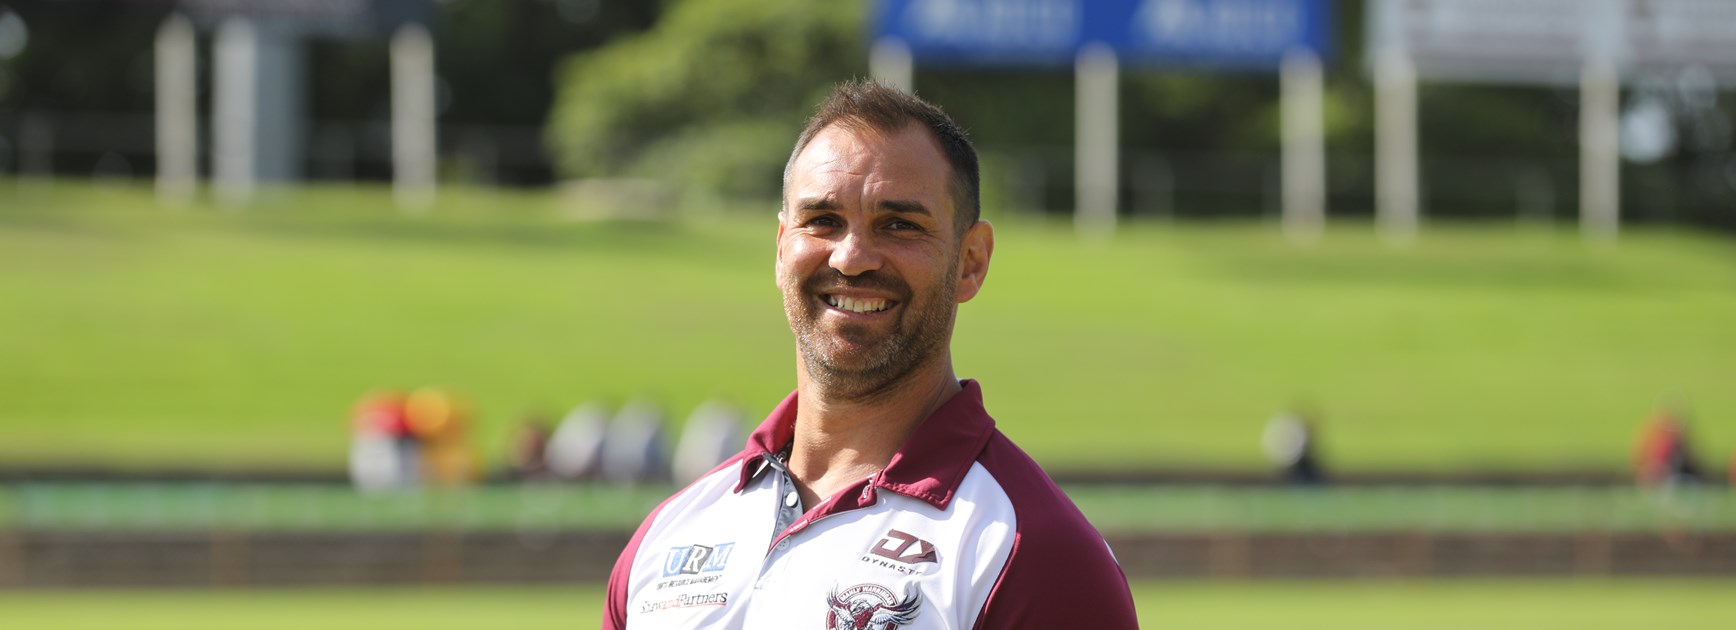 Adam McEwen has made an impressive start to his coaching career at Manly